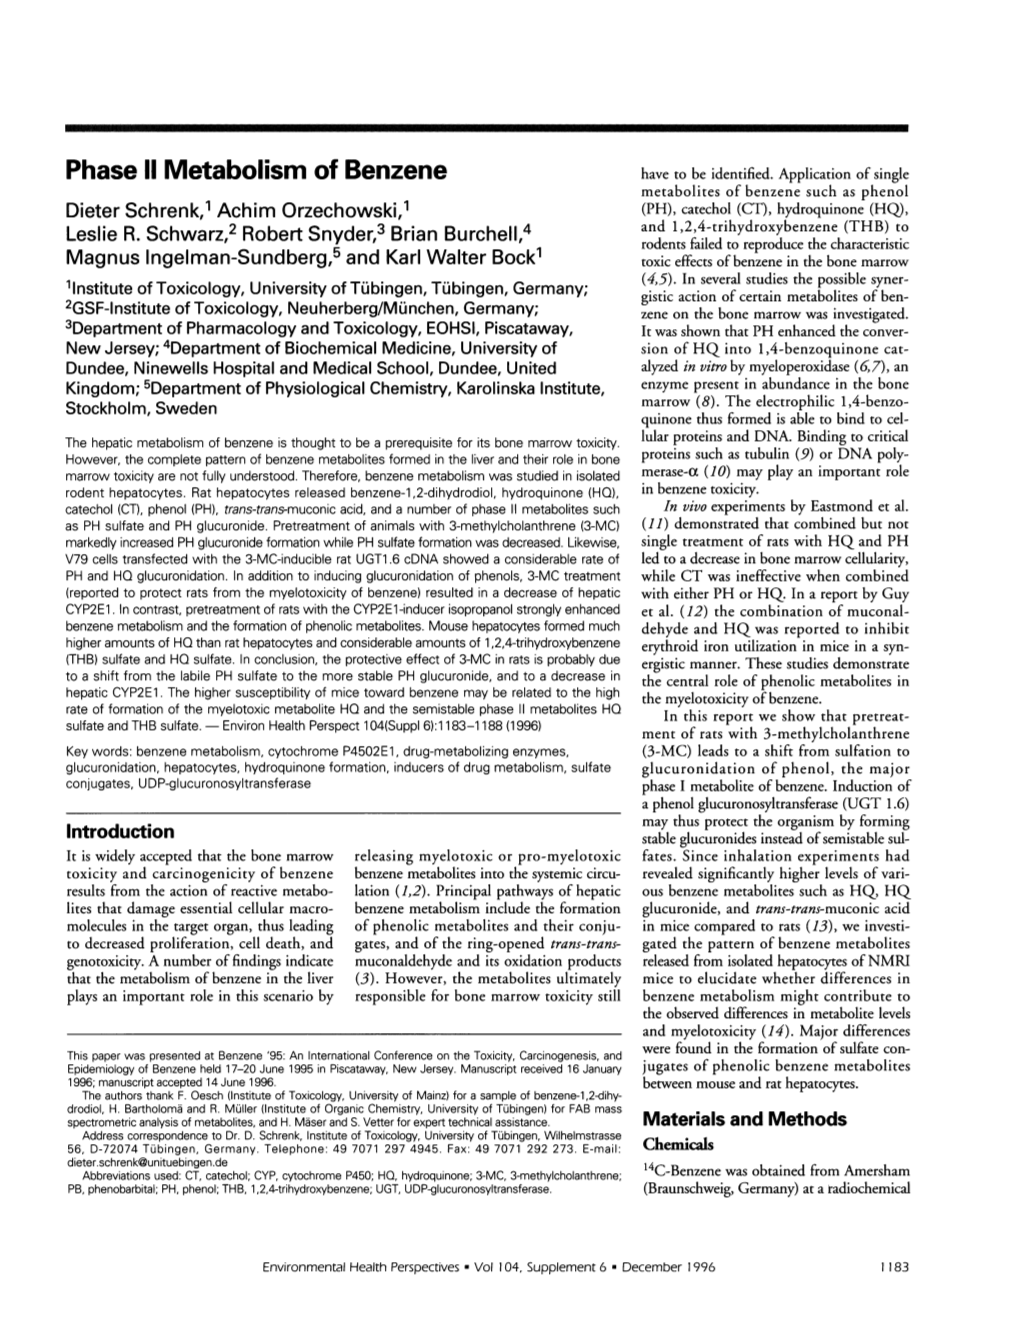 Phase 11 Metabolism of Benzene Have to Be Identified